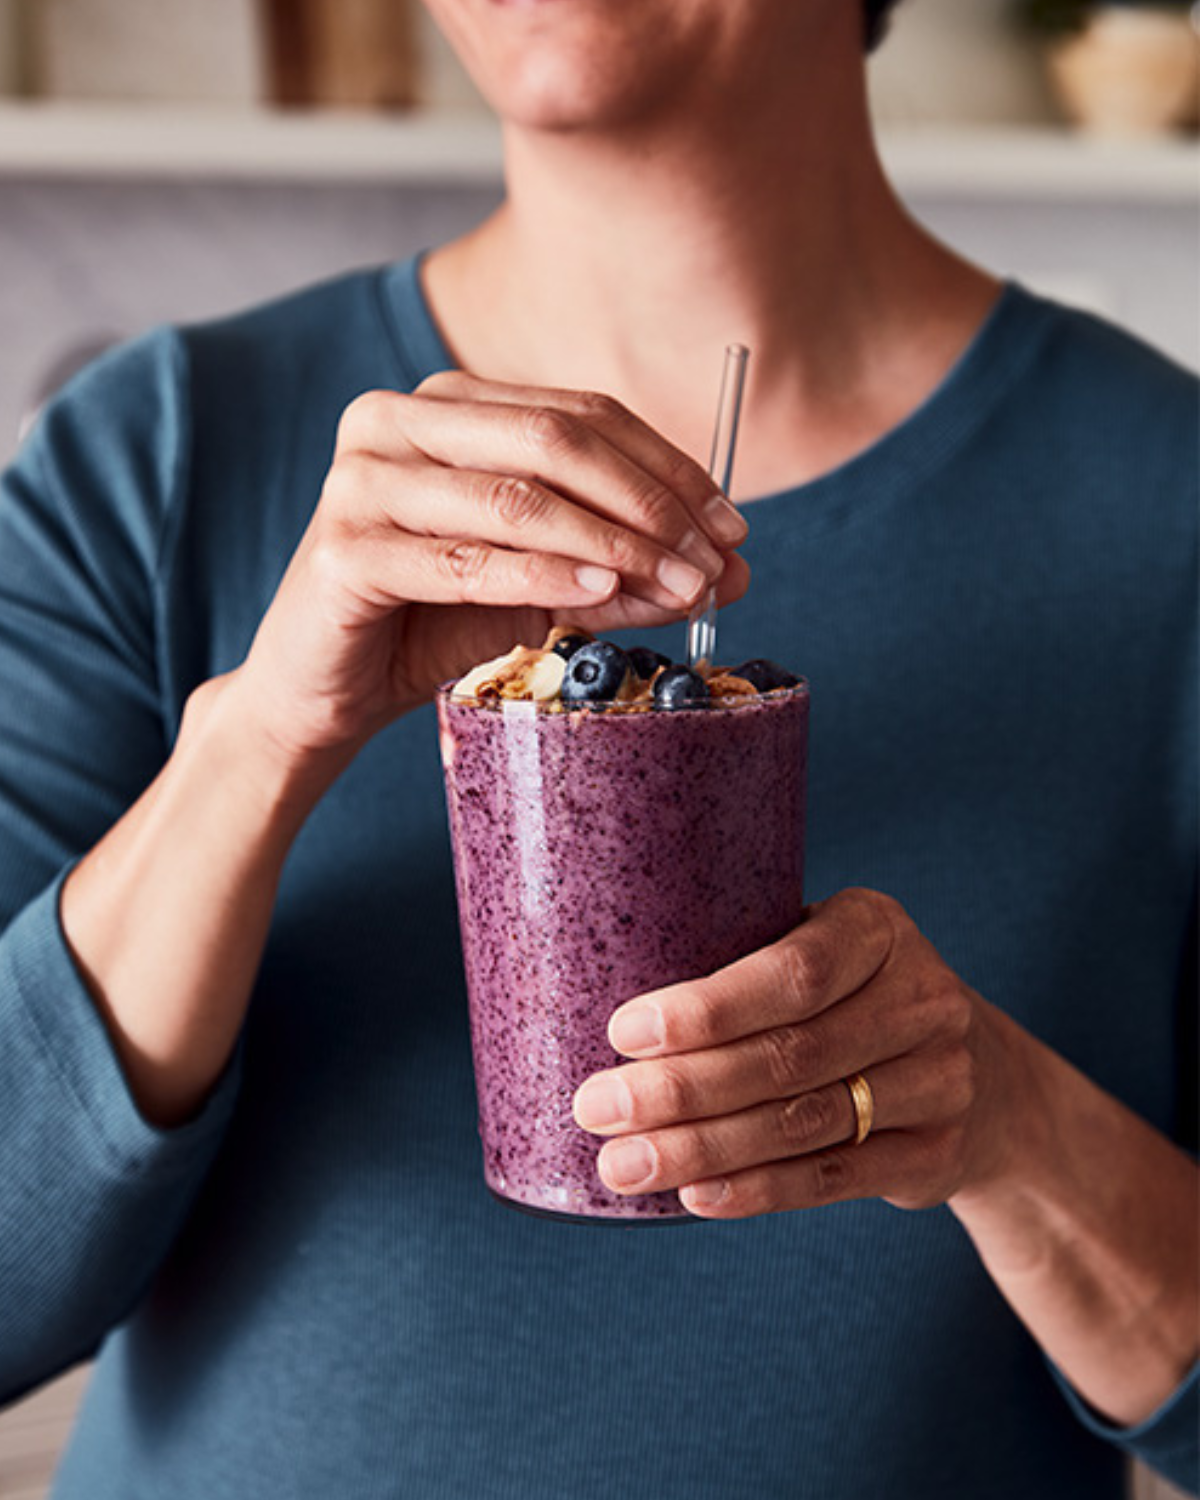 A smiling woman holding a purple fruit smoothie made from blended blueberries and bananas.